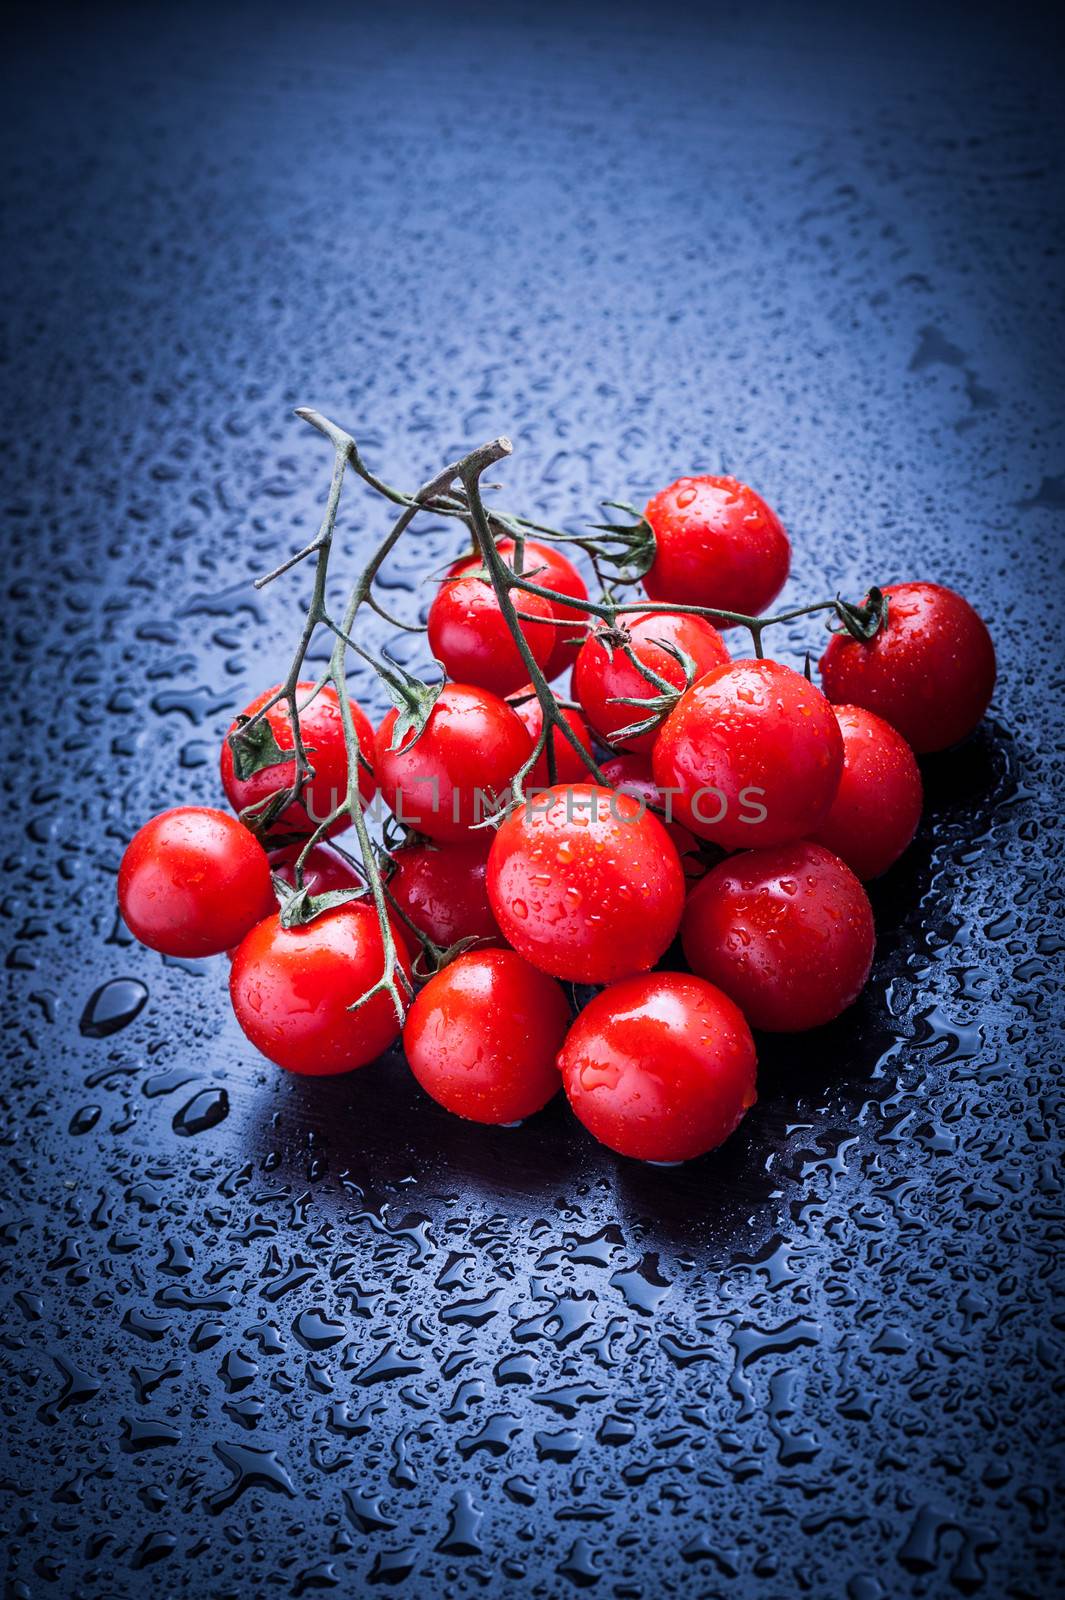 Cherry tomatoes after rain on blue